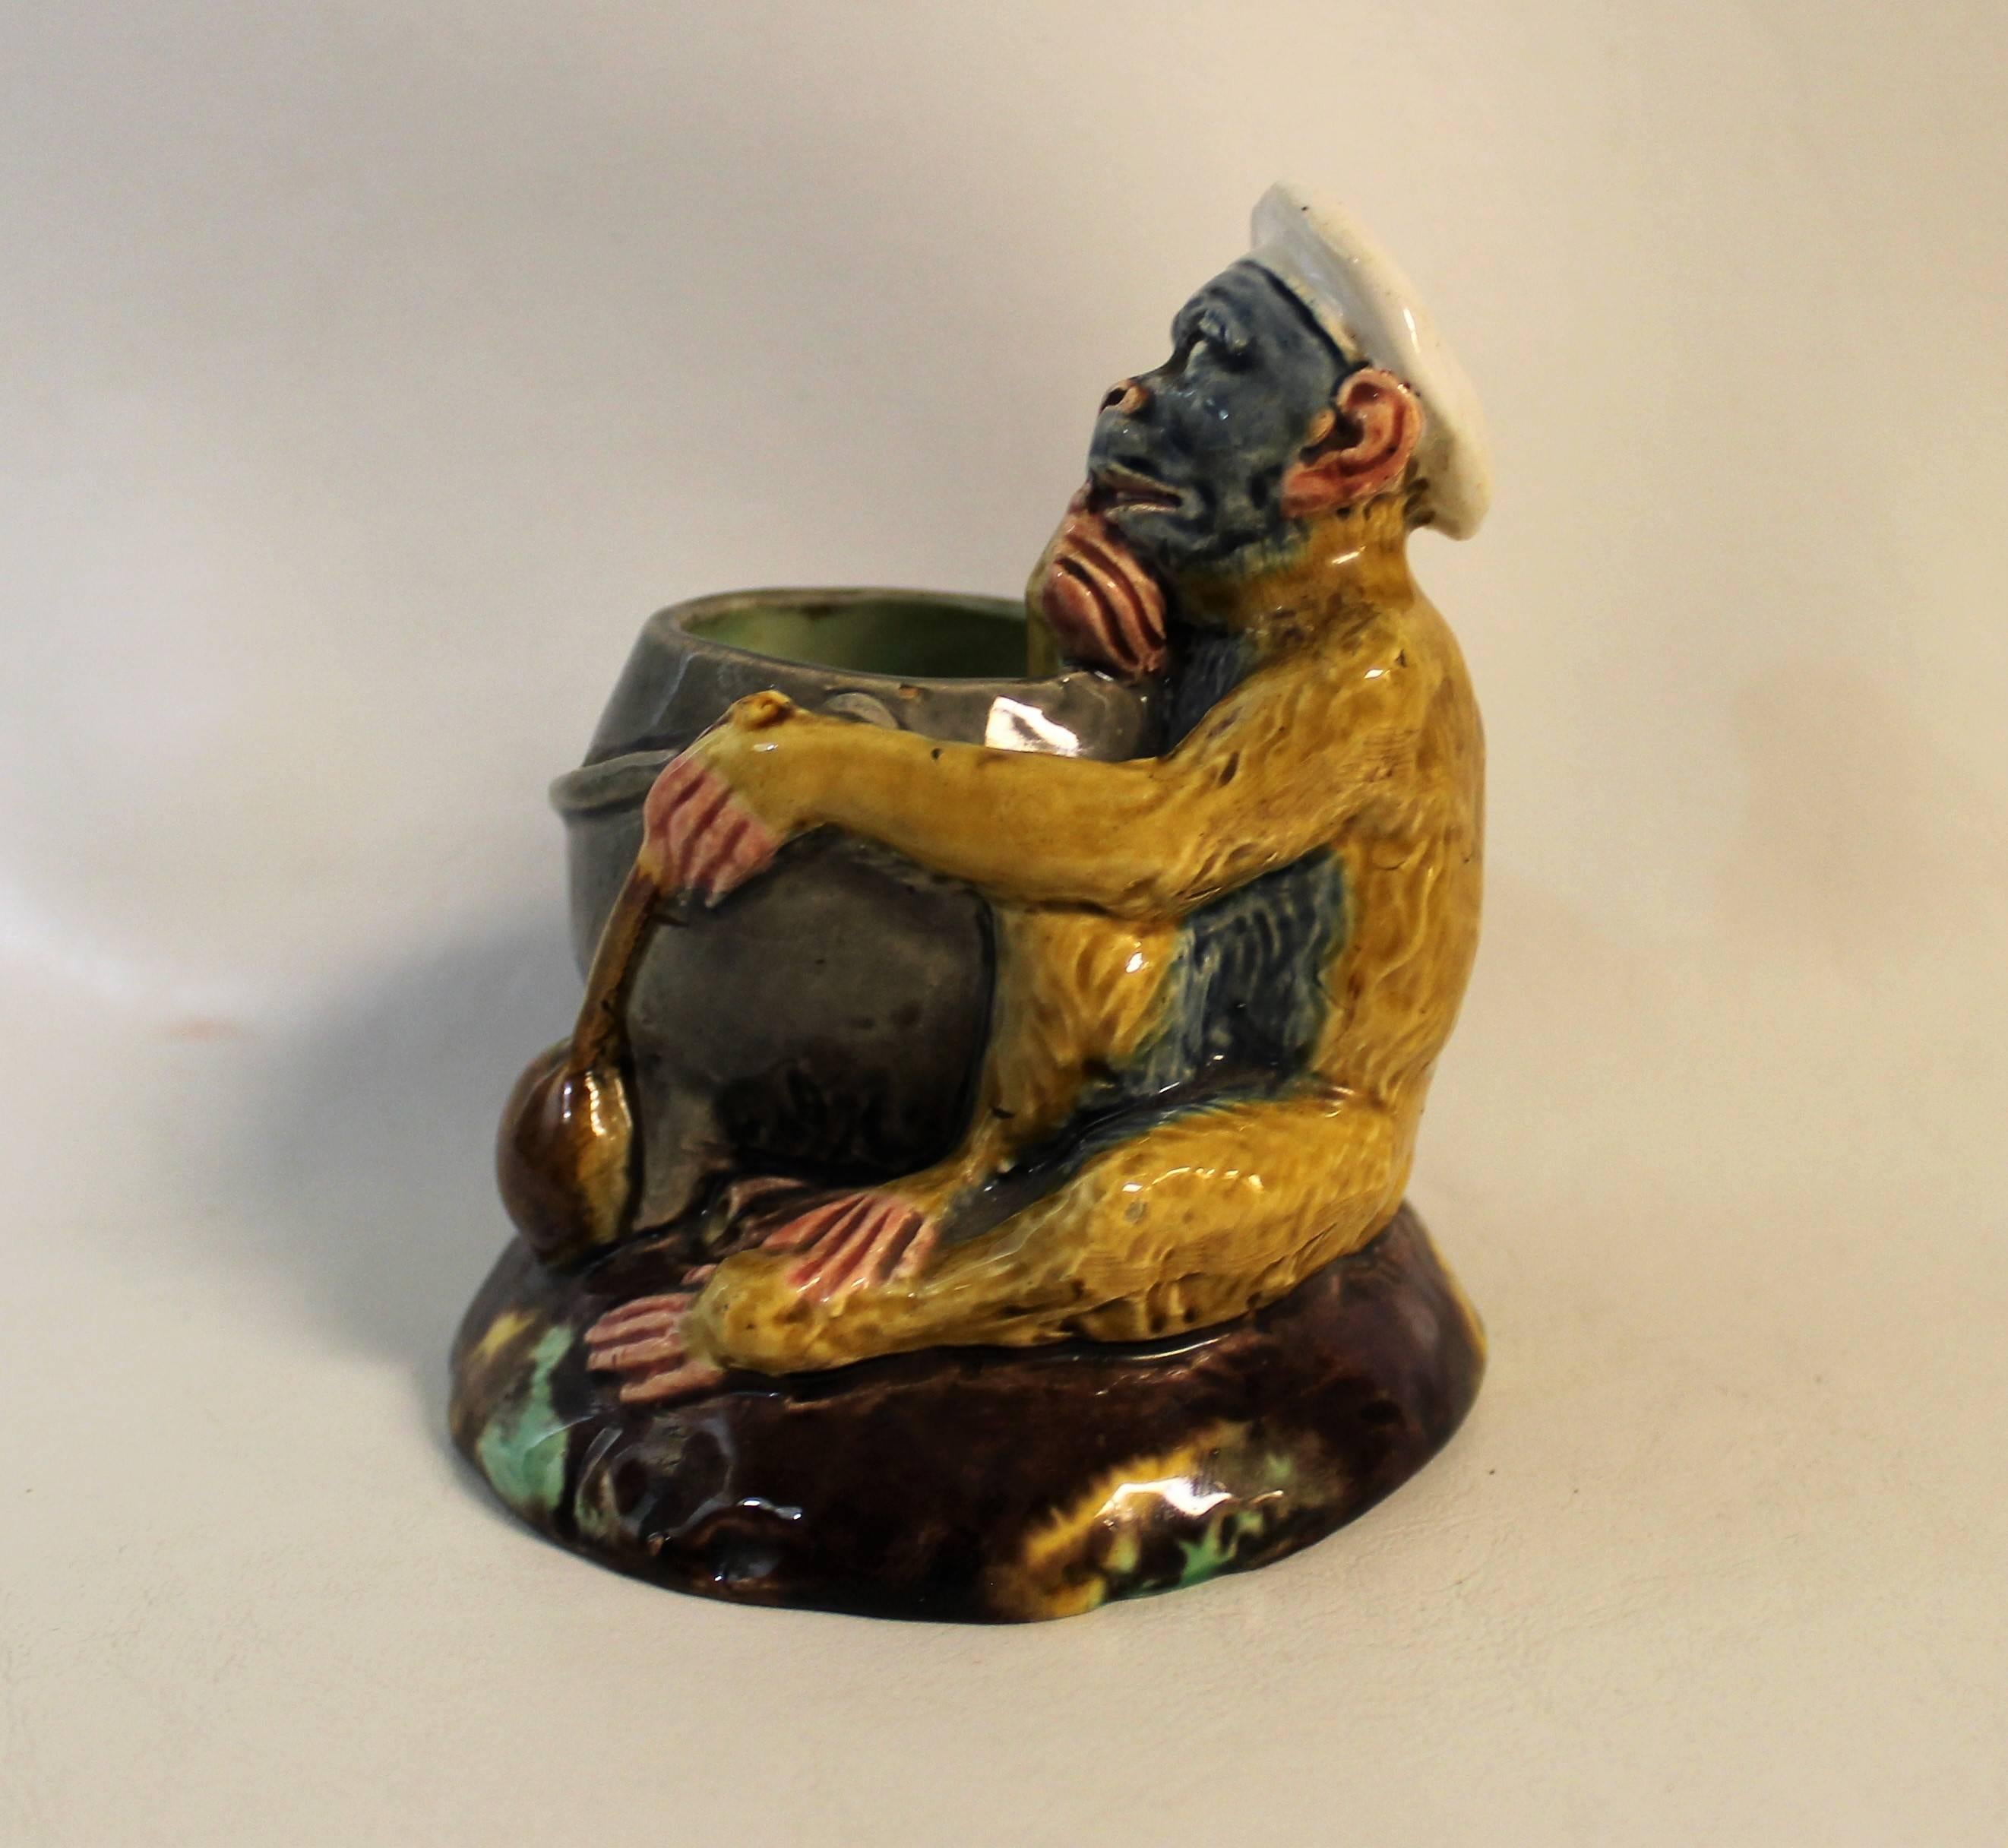 19th century Thomas Sargent French Majolica match holder with figural monkey.